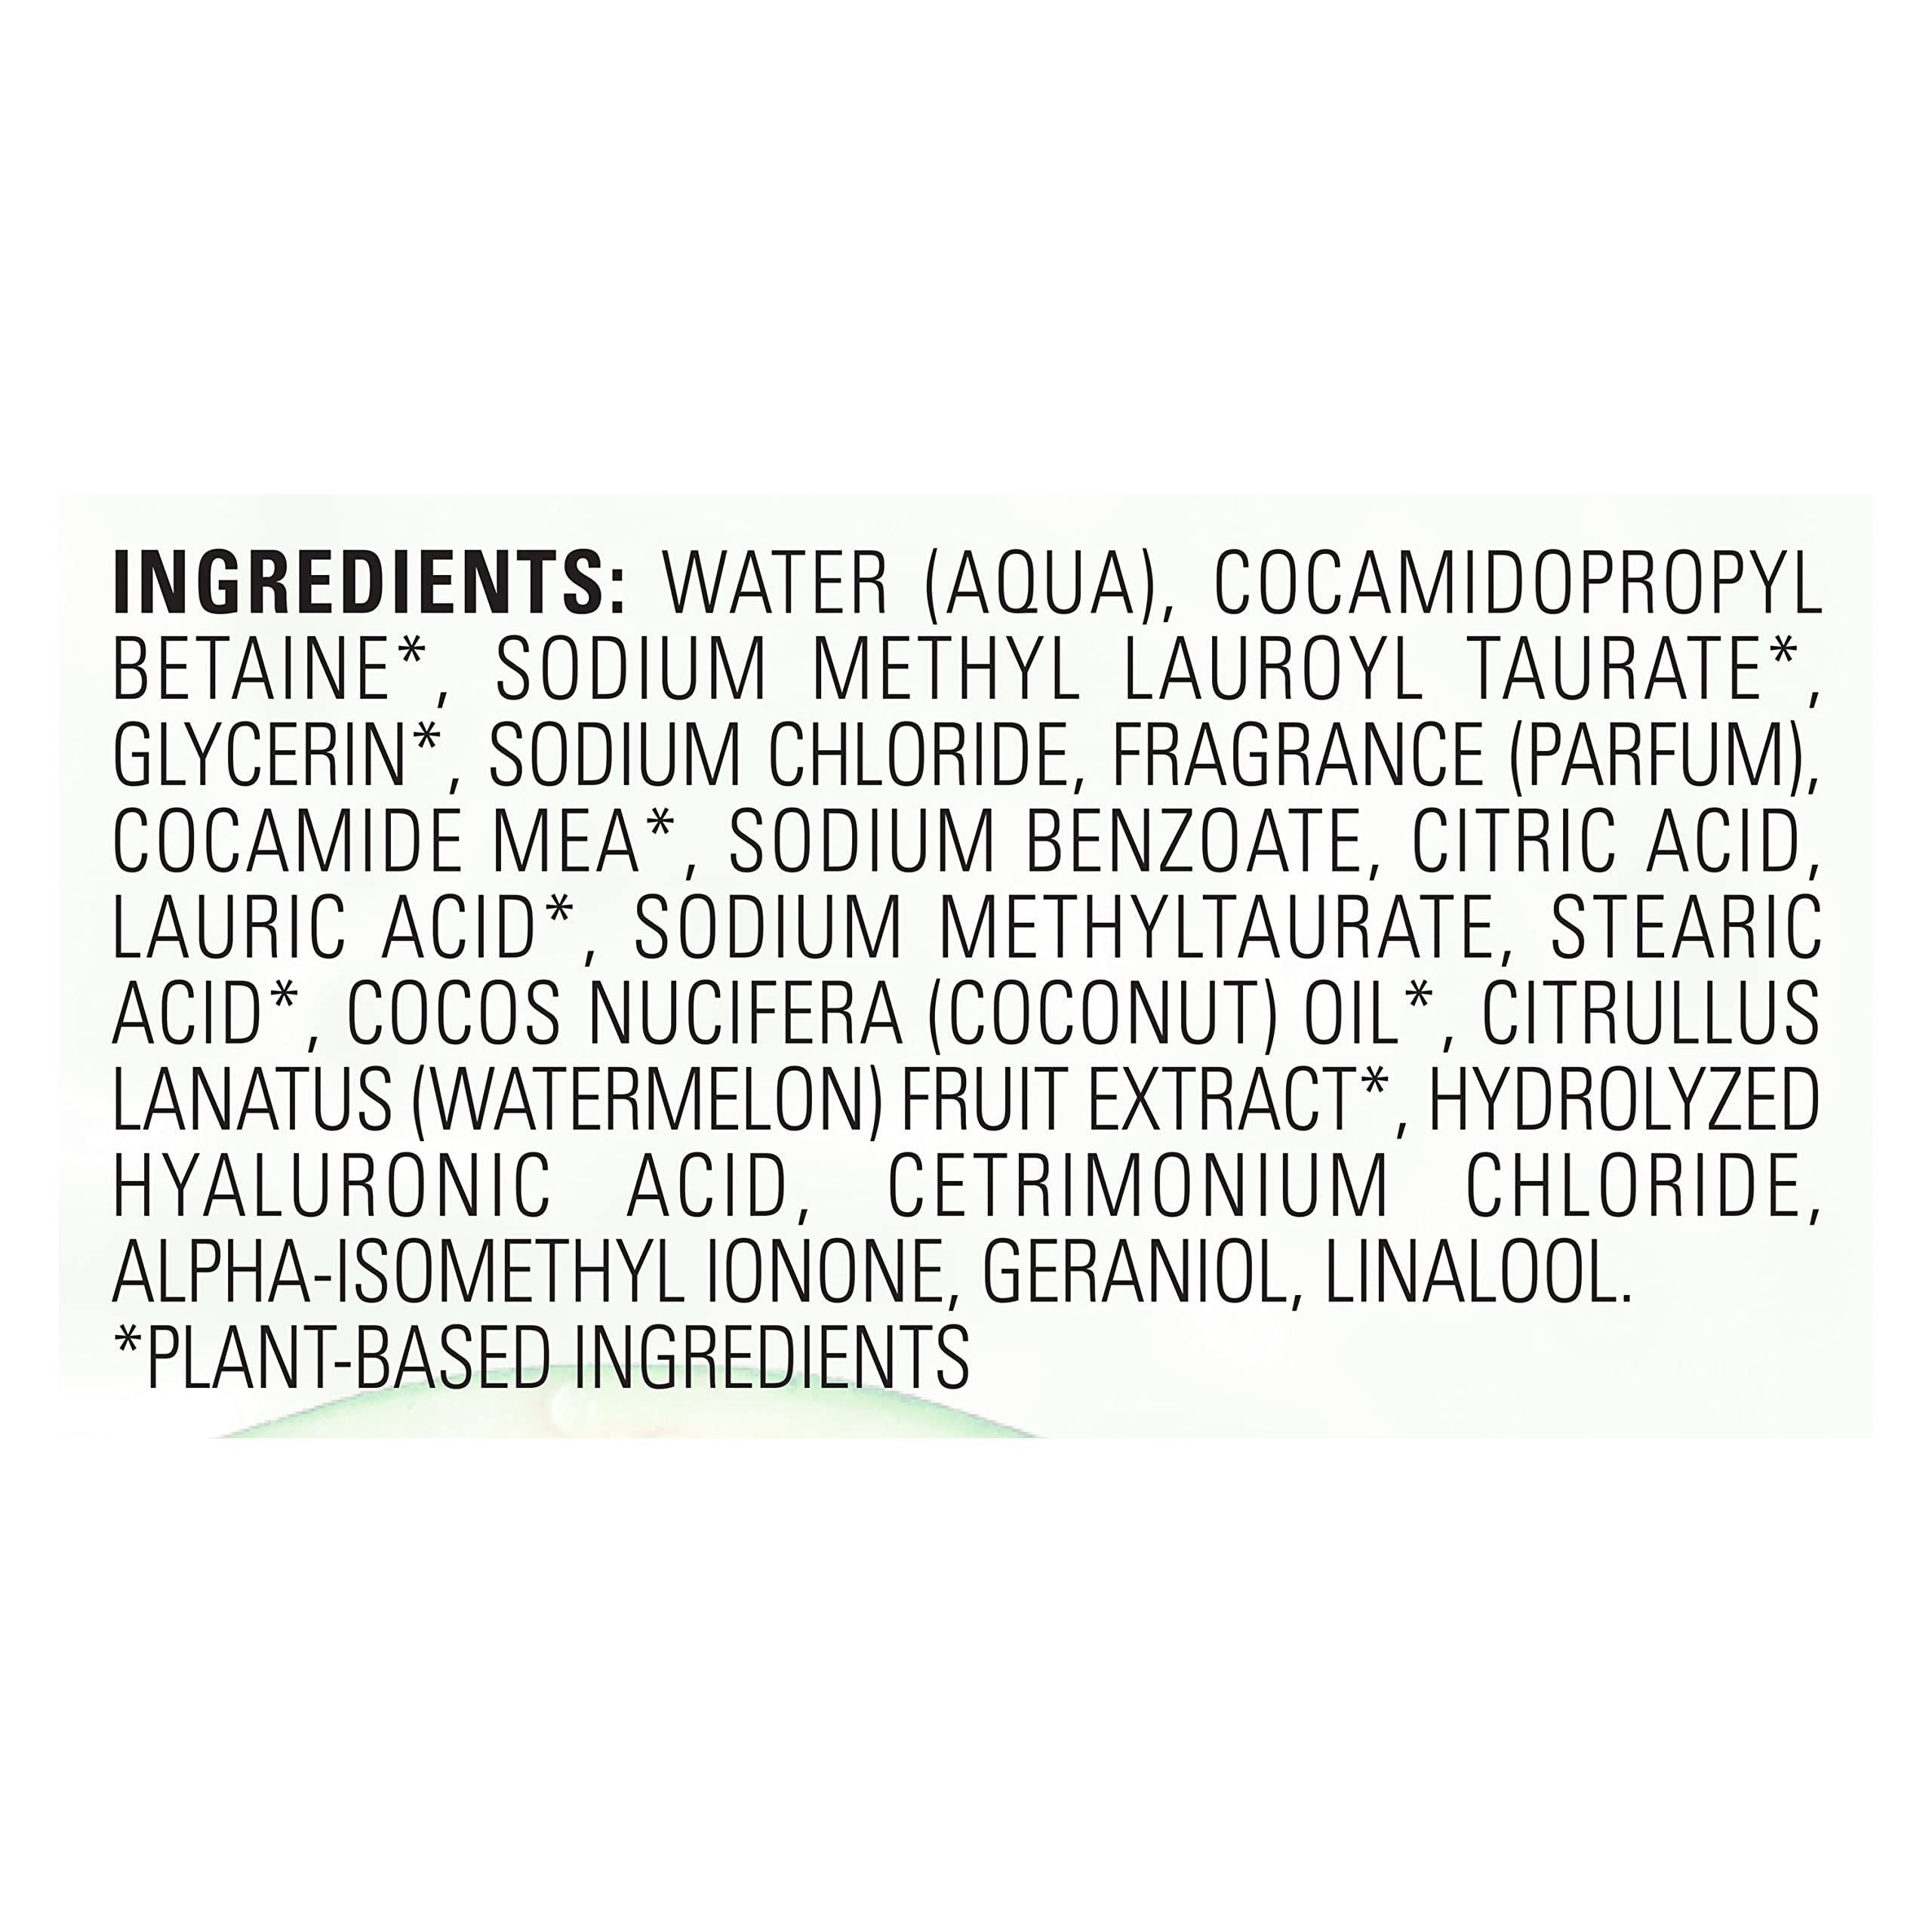 Love Beauty And Planet Plant-Based Body Wash Hydrate and Restore Skin Watermelon and Hyaluronic Acid Made with Plant-Based Cleansers and Skin Care Ingredients 32.3 fl oz